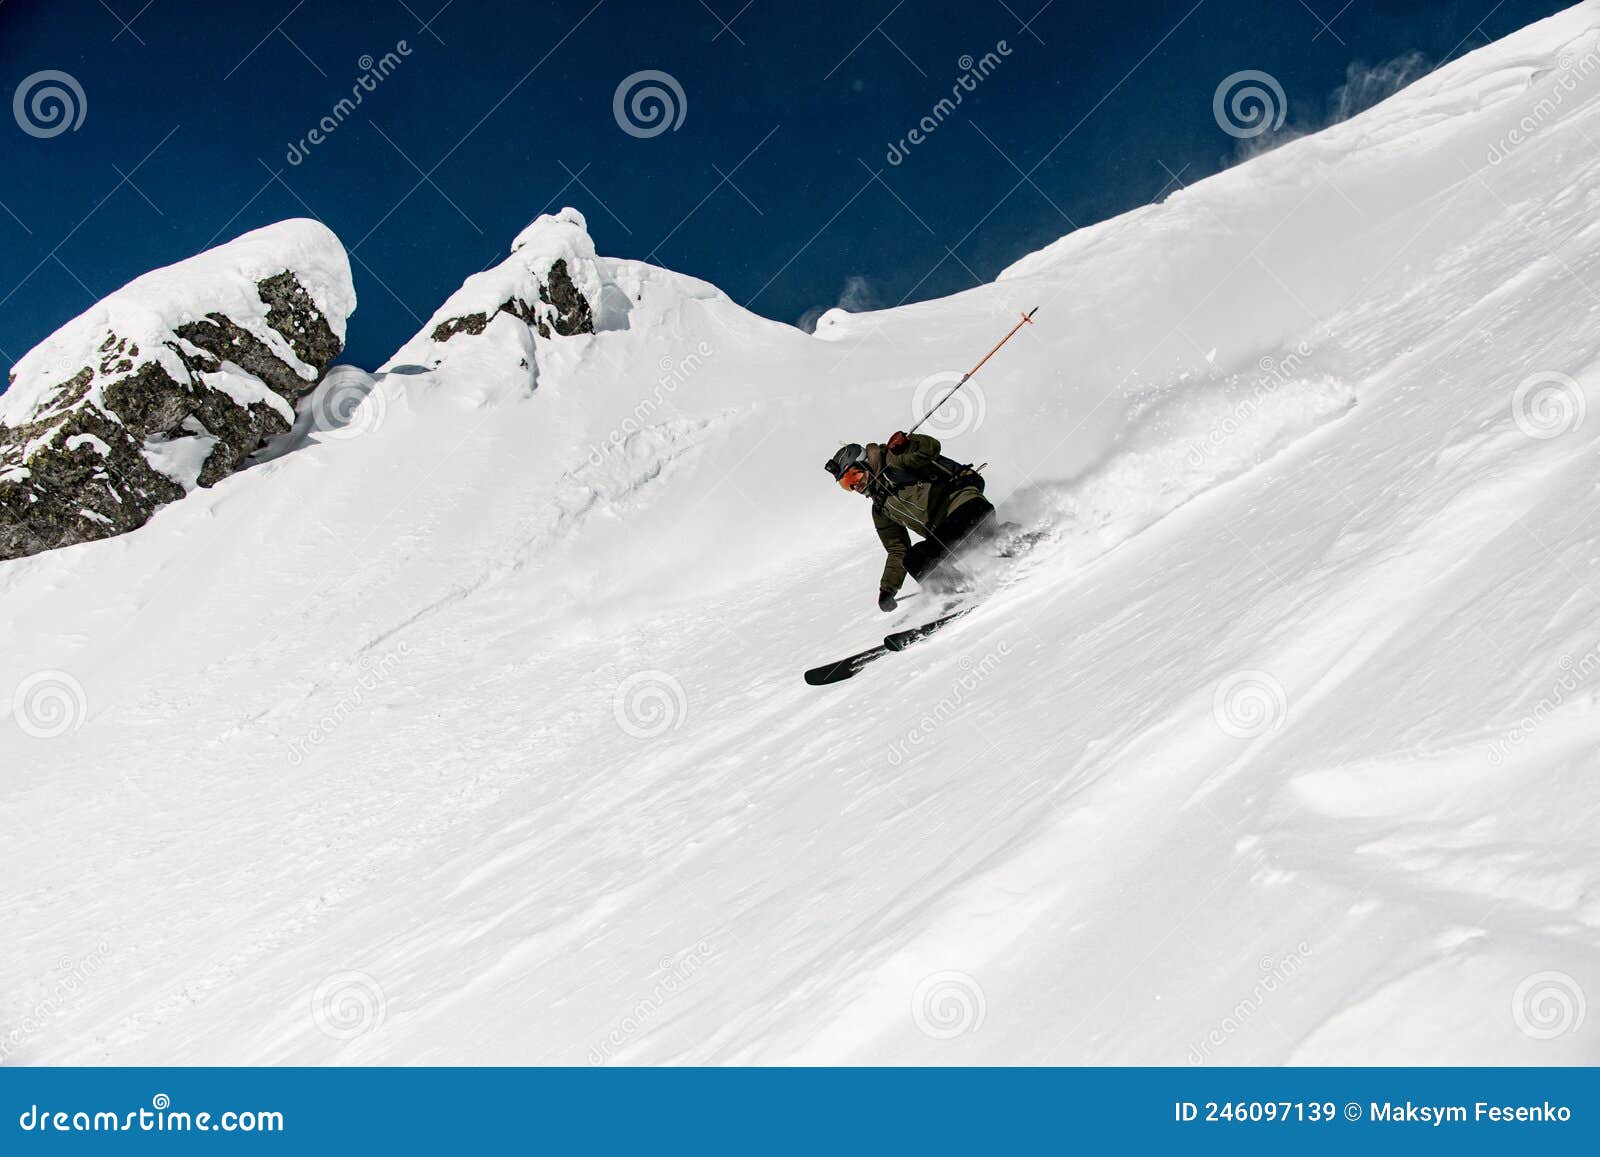 Great View on Male Skier Slides Down the Snow-covered Slope. Freeride ...